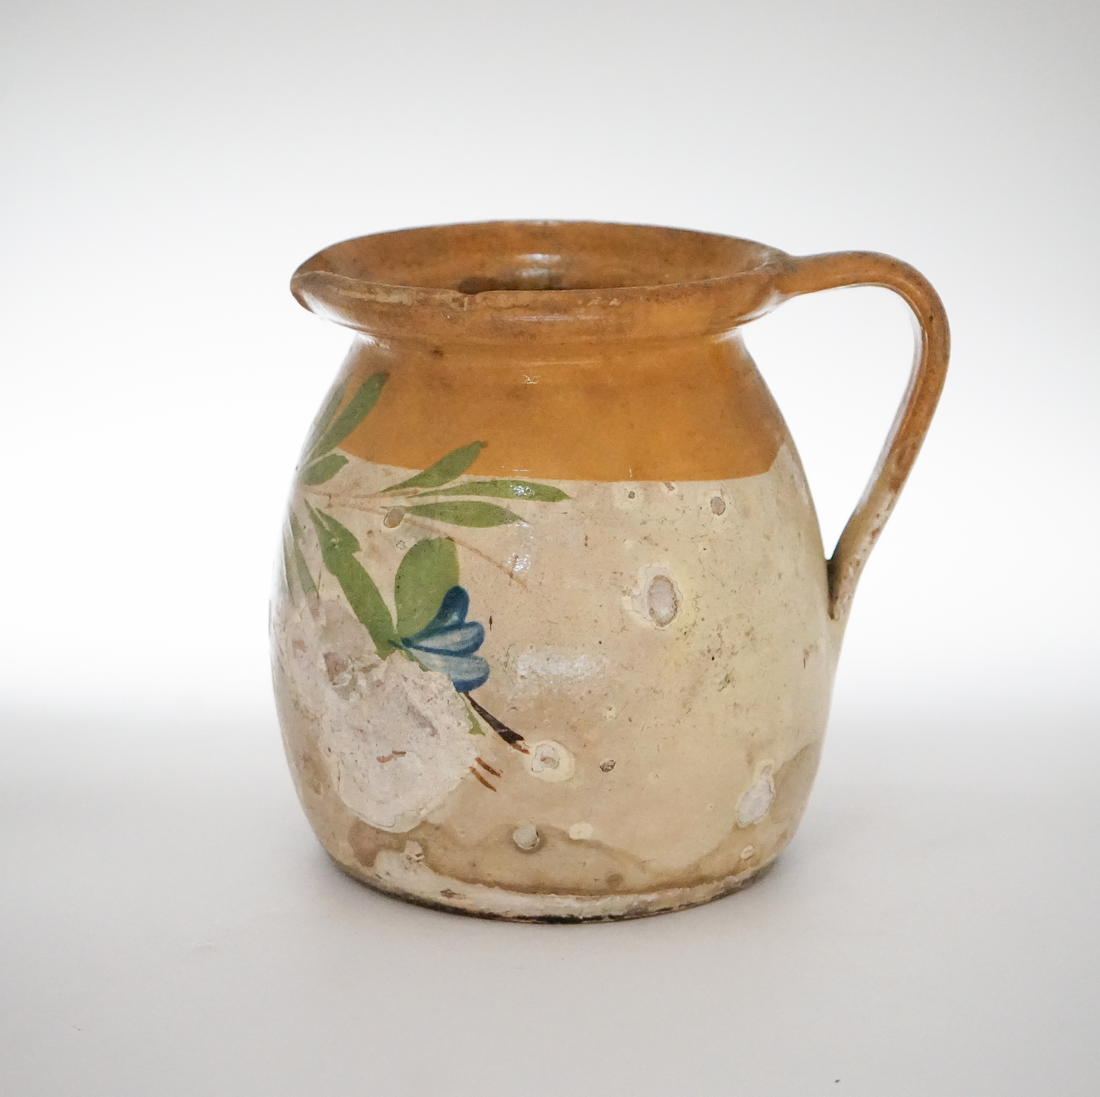 22. Hand Painted Antique Hungarian Pitcher